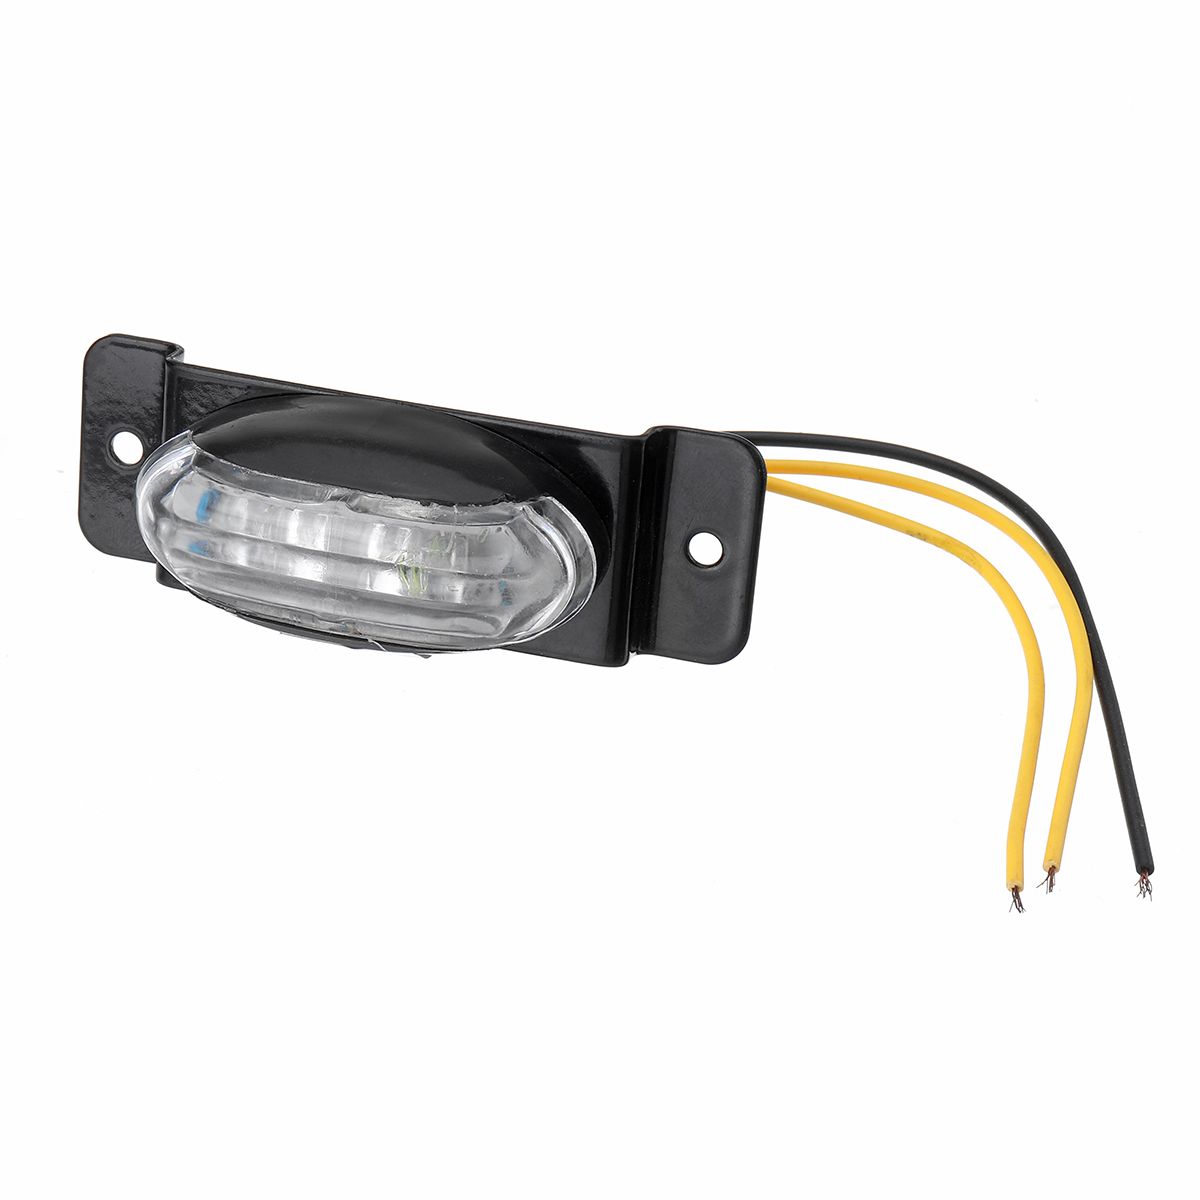 Yellow-24V-LED-Side-Marker-Lights-License-Plate-Lamp-Piranha-Style-with-stand-for-Truck-Trailer-1520445